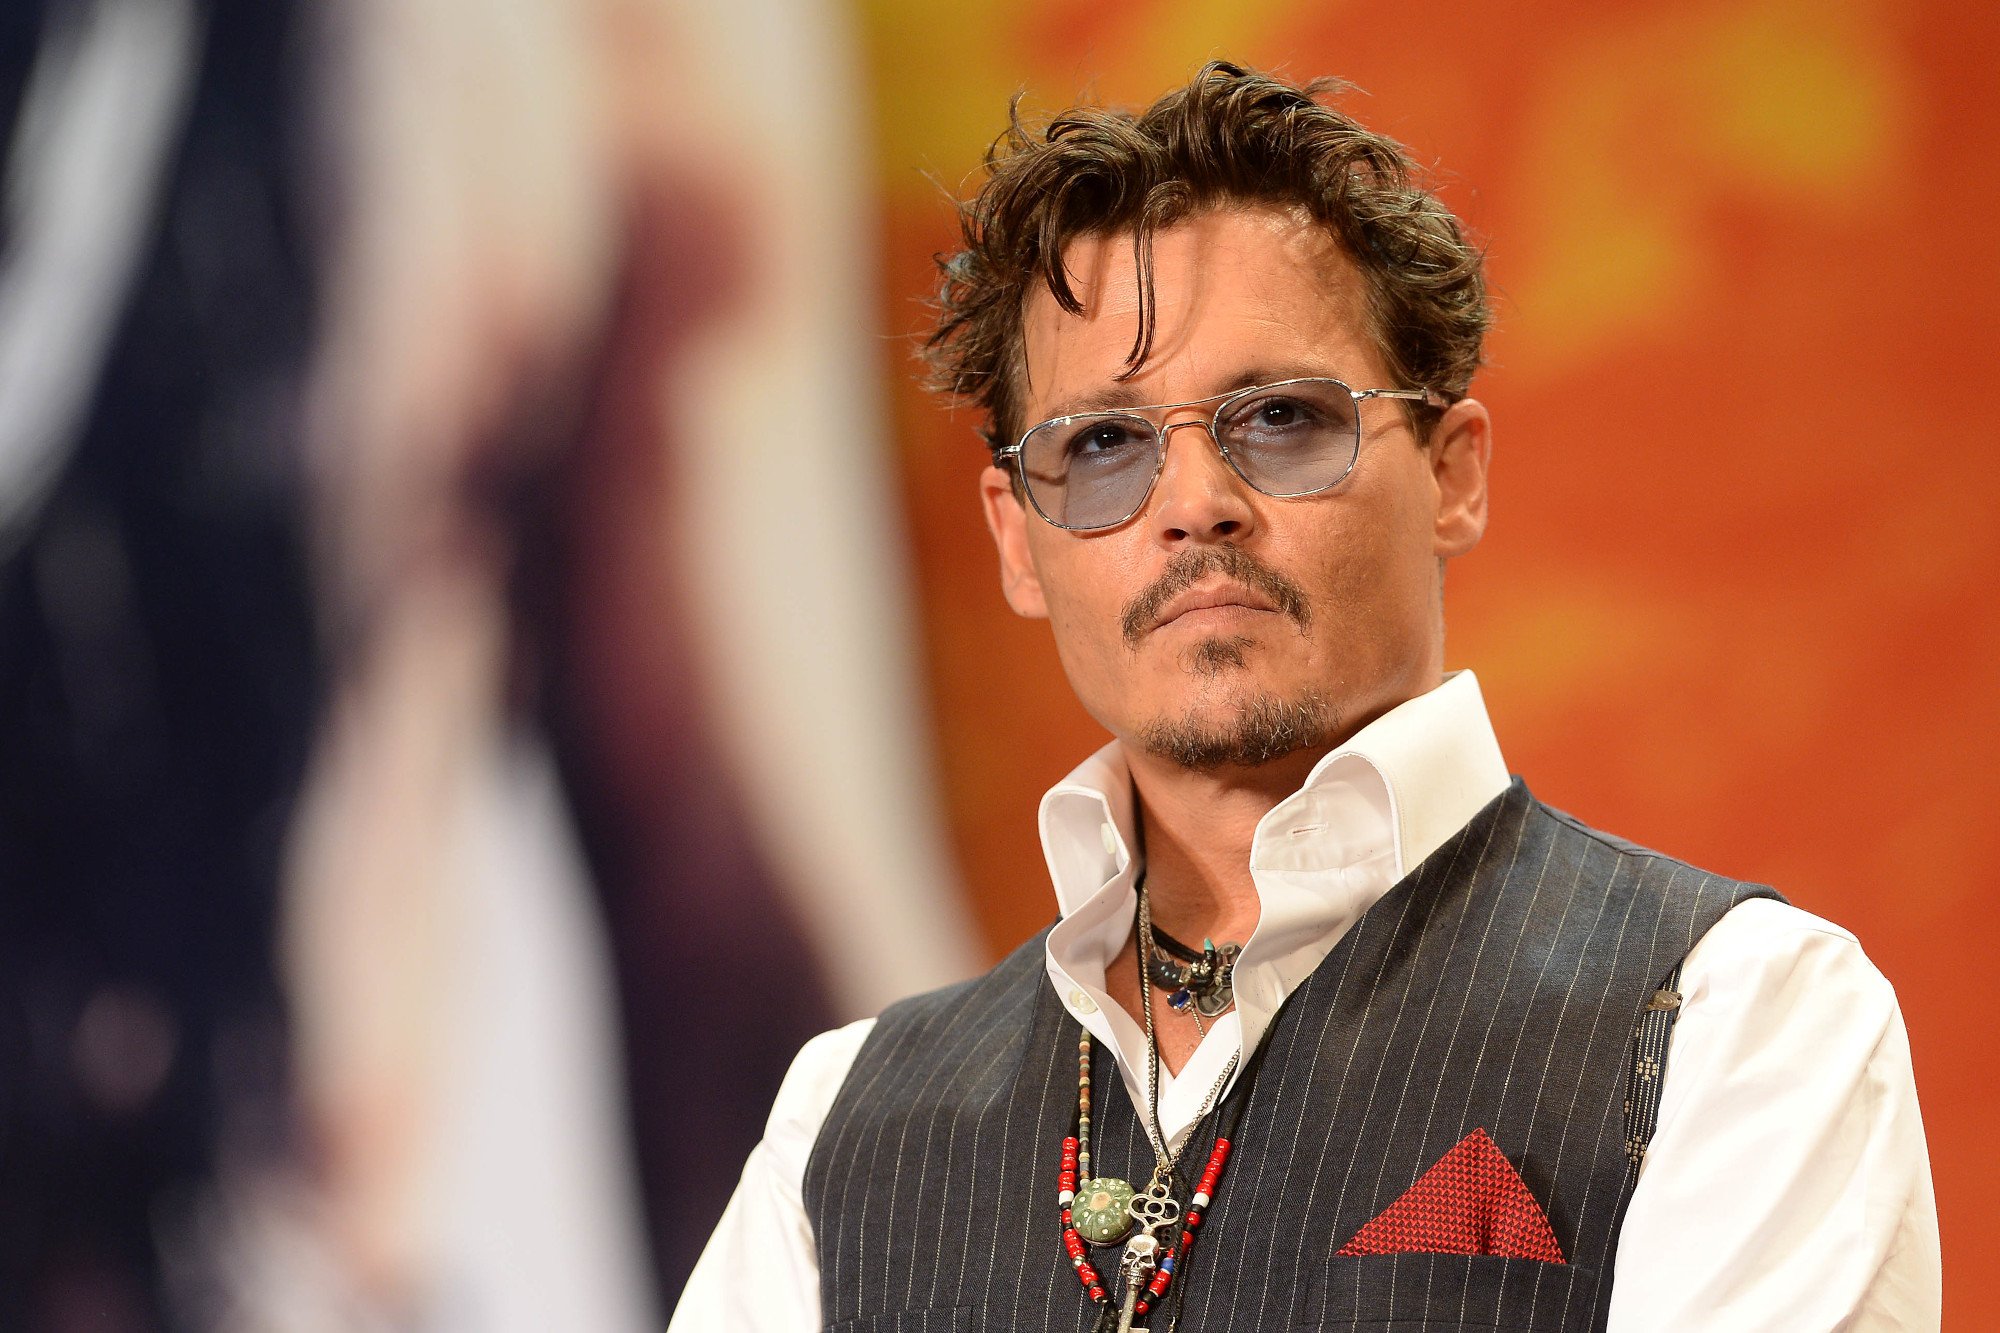 Johnny Depp wearing glasses, a white collared shirt, and a striped black and white vest. His hair is gelled back and one piece hangs in front of his face. He's wearing a blank expression.